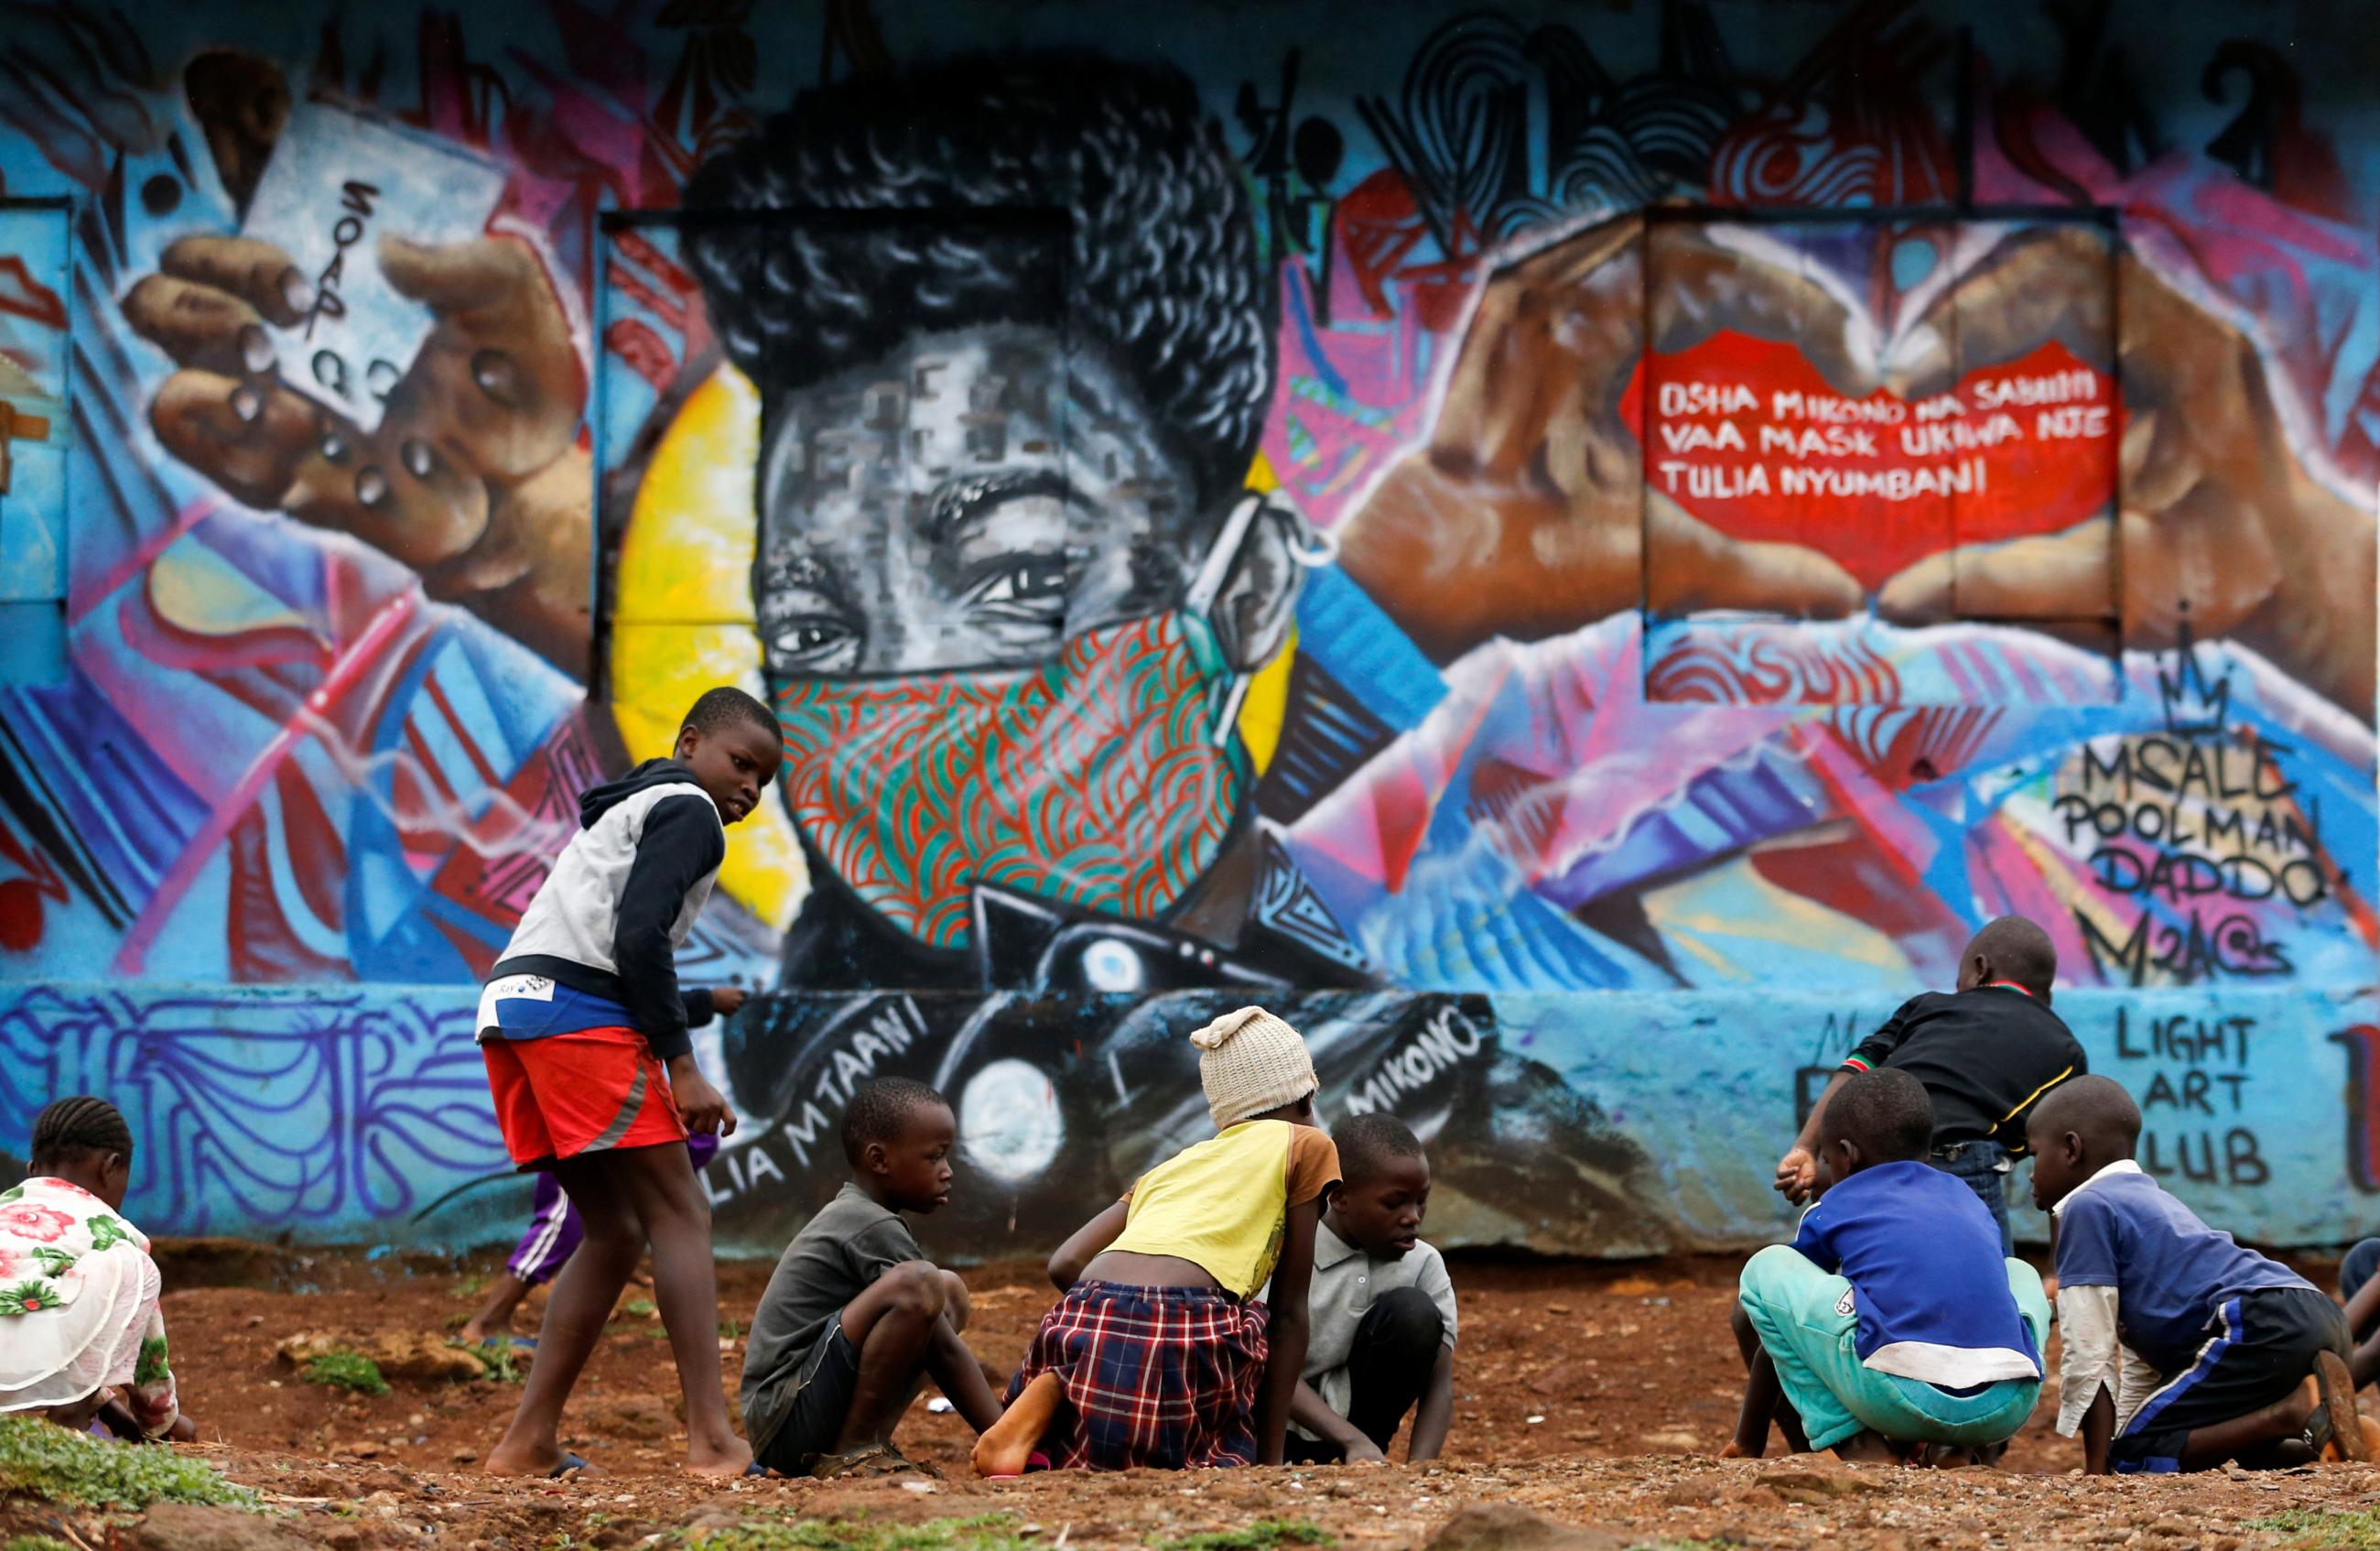 Children play in front of a graffiti by Mathare Roots's youth group that advocates against the spread of the coronavirus disease (COVID-19), at the Mathare Valley slum, in Nairobi, Kenya April 19, 2020.